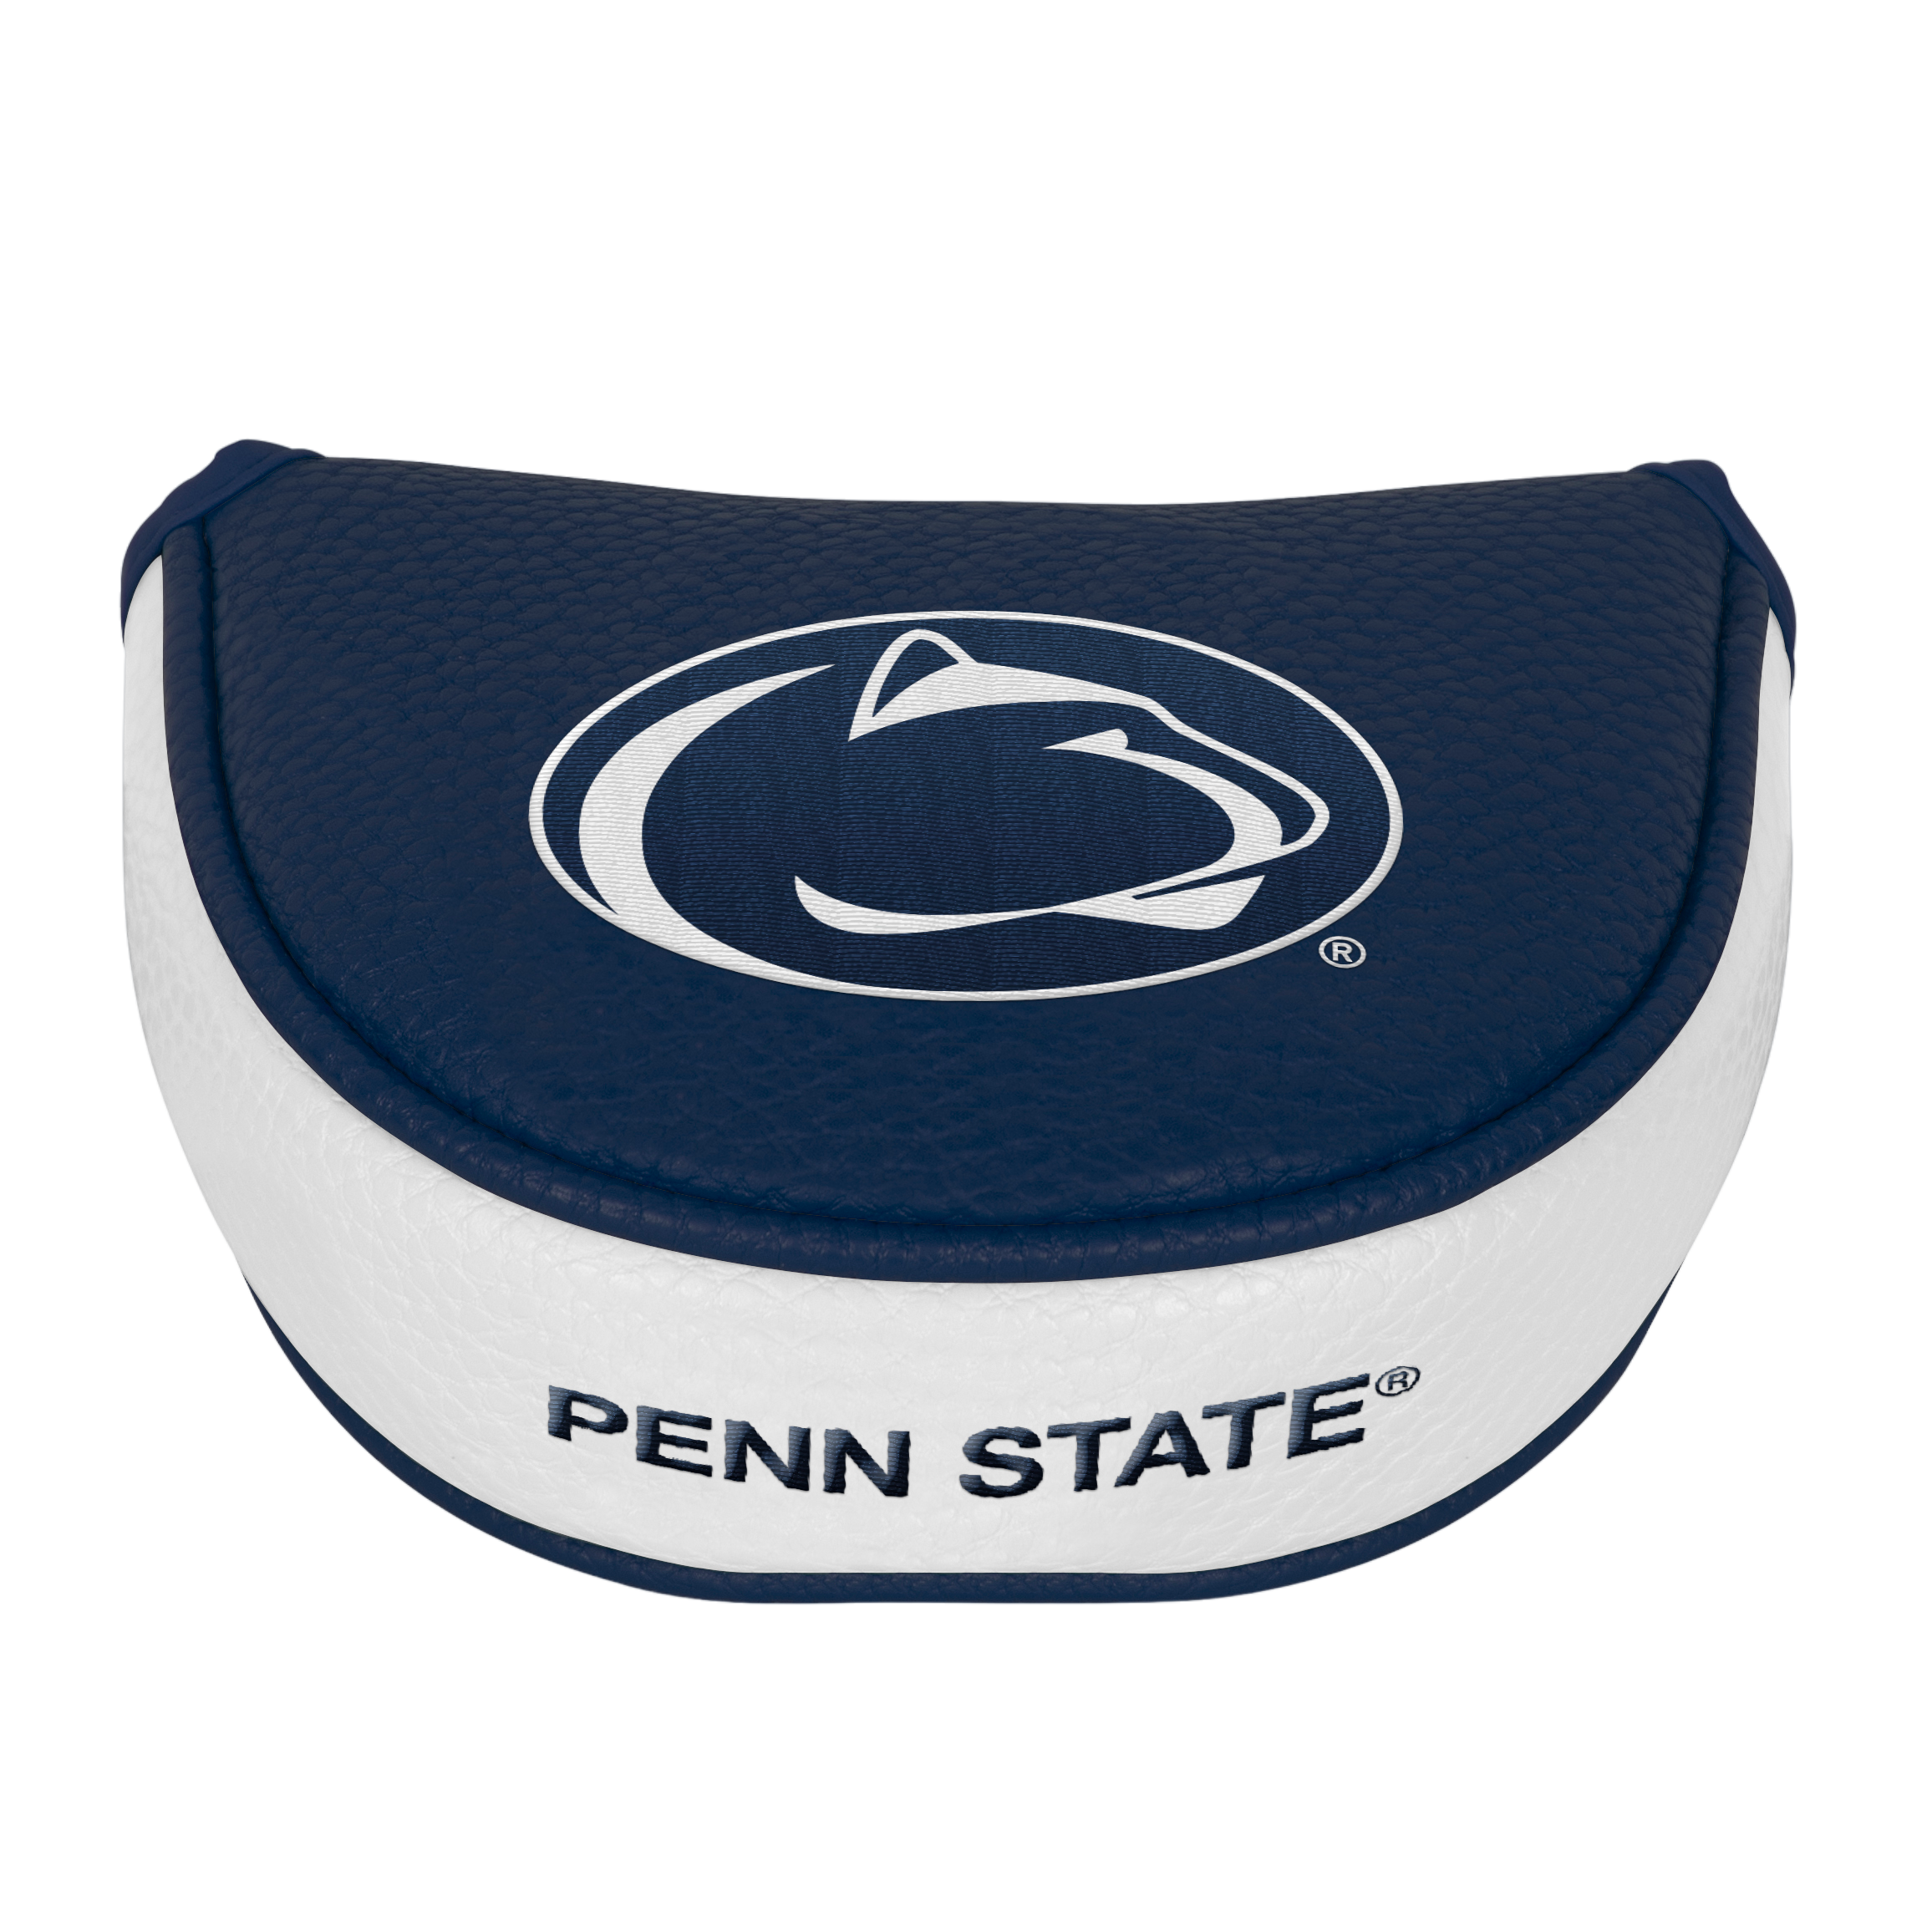 Penn State Nittany Lions Mallet Putter Cover